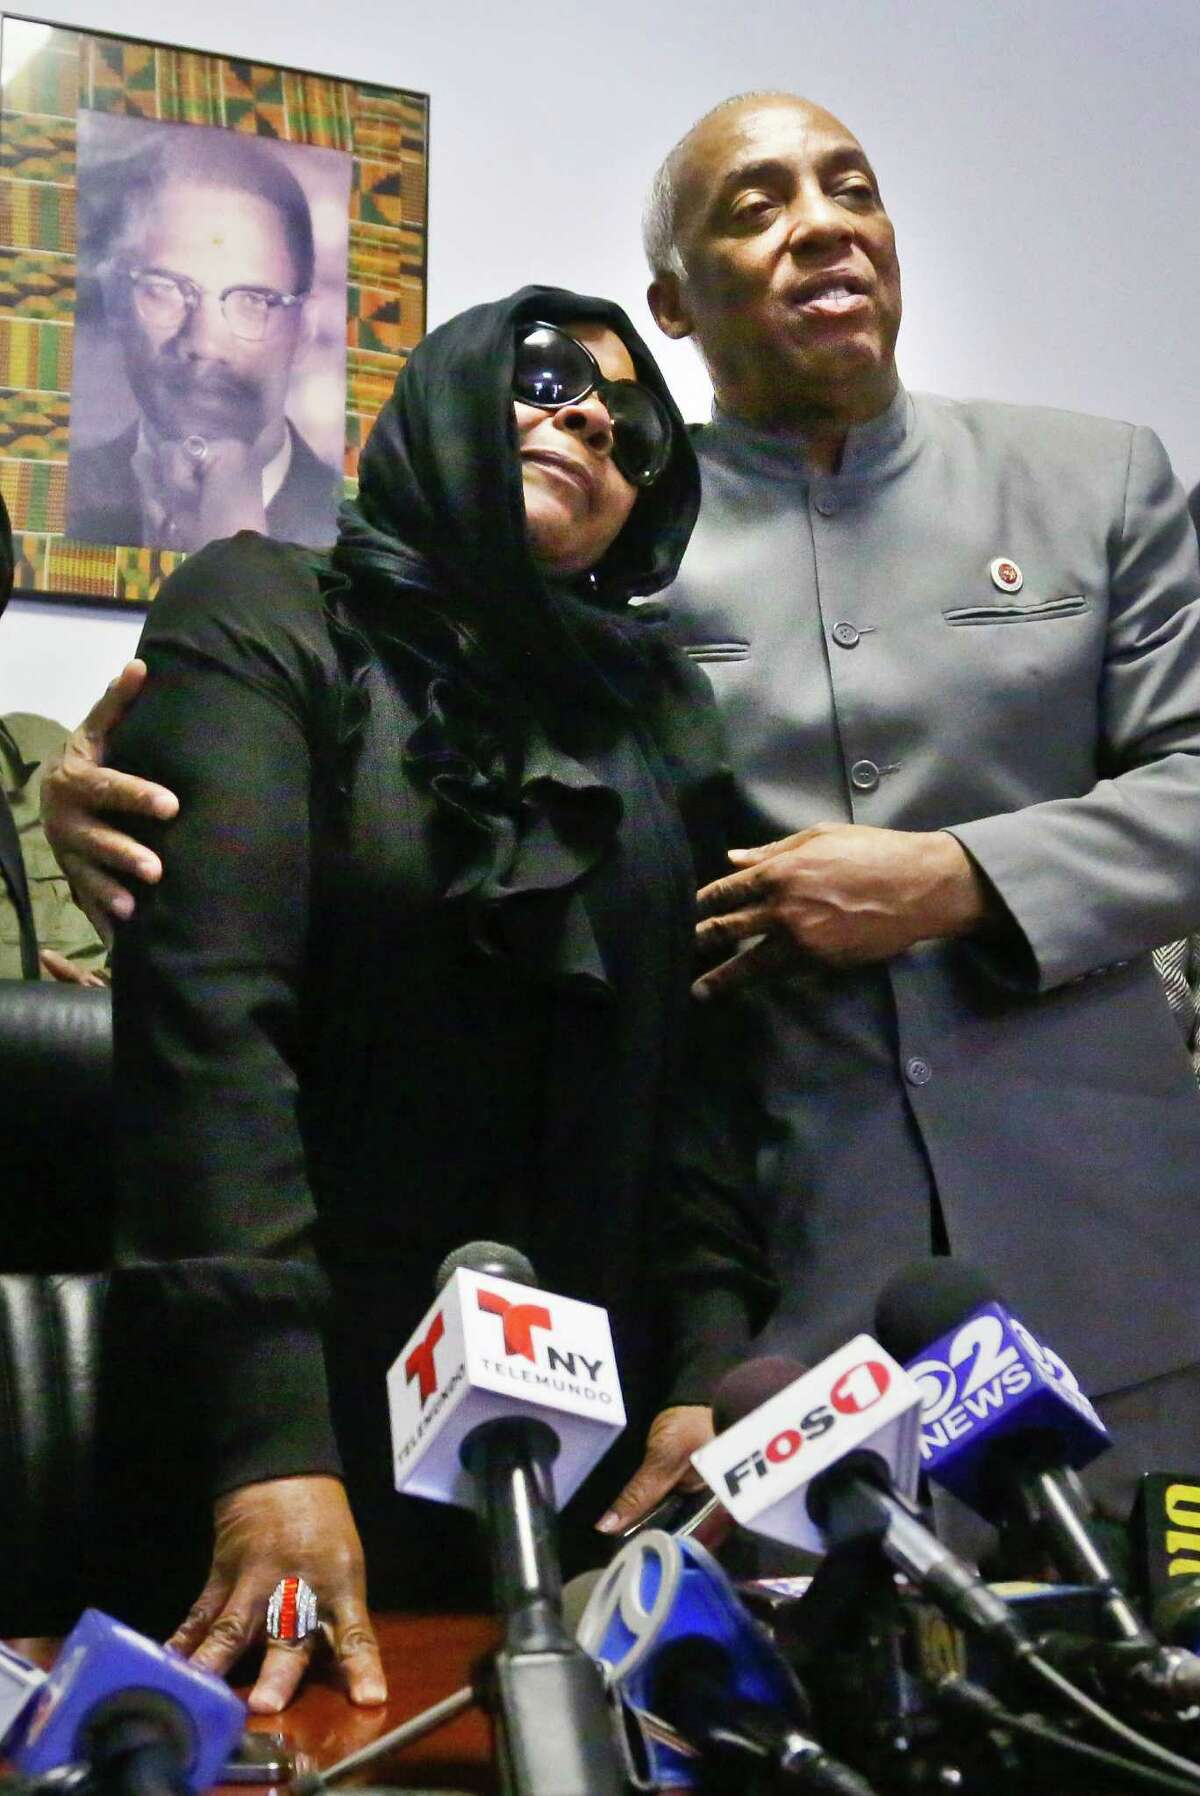 Carol Gray, left, leans on City Councilman Charles Barron, during a press conference on Thursday, March 14, 2013 in the East Flatbush neighborhood of Brooklyn, N.Y. Gray's son Kimani "Kiki" Gray, 16, was shot to death on a Brooklyn street last Saturday night by plainclothes police officers who say the youth pointed a .38-caliber revolver at them, while Gray's family says he was unarmed. (AP Photo/Bebeto Matthews)